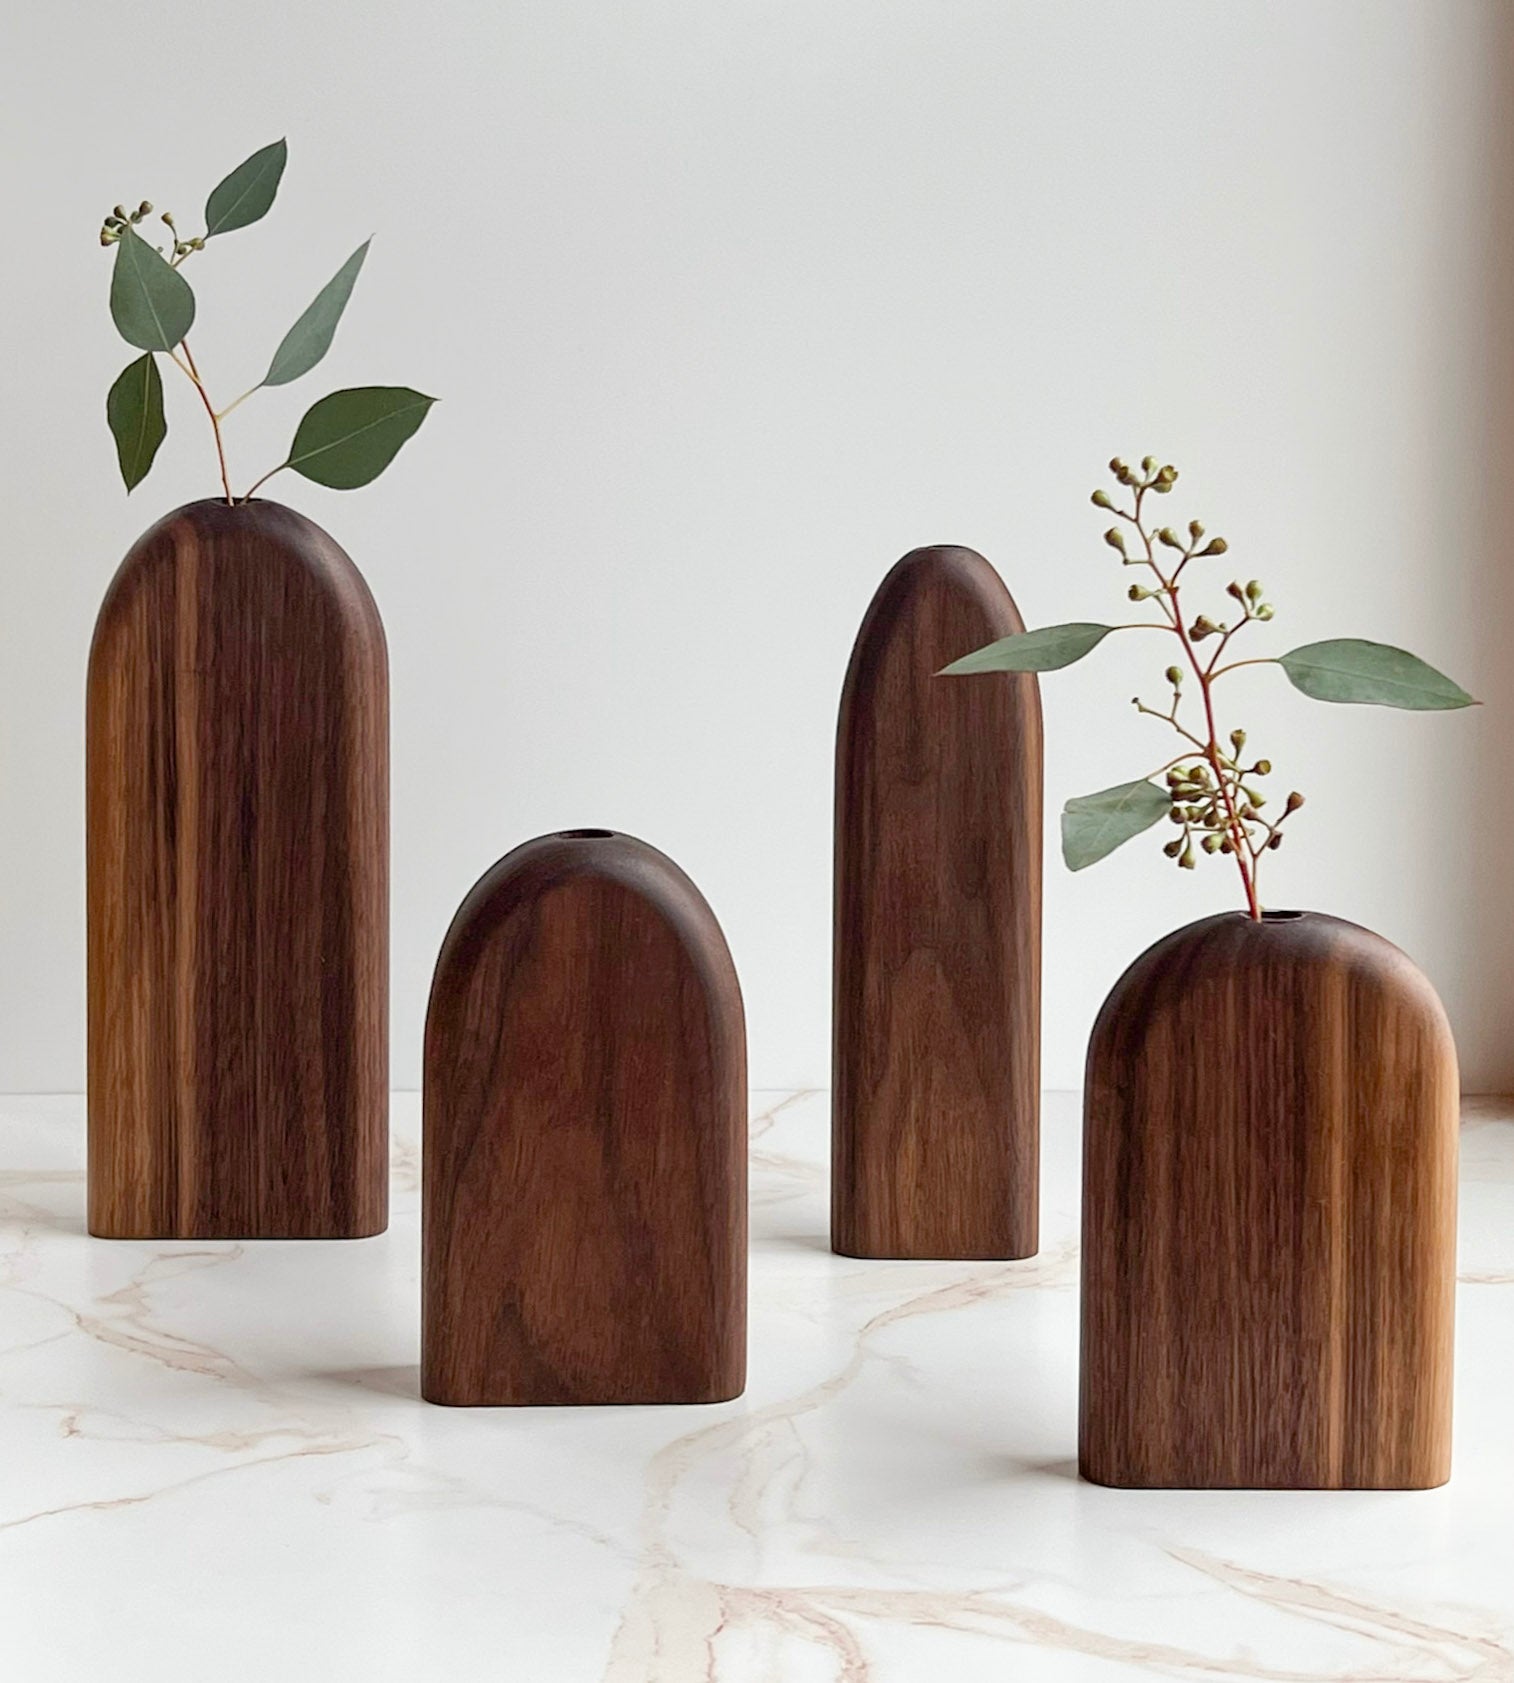 Rounded top, long and skinny and short and wide organic wooden bud/flower vases handmade by Camino Woodshop in Milwaukee, WI